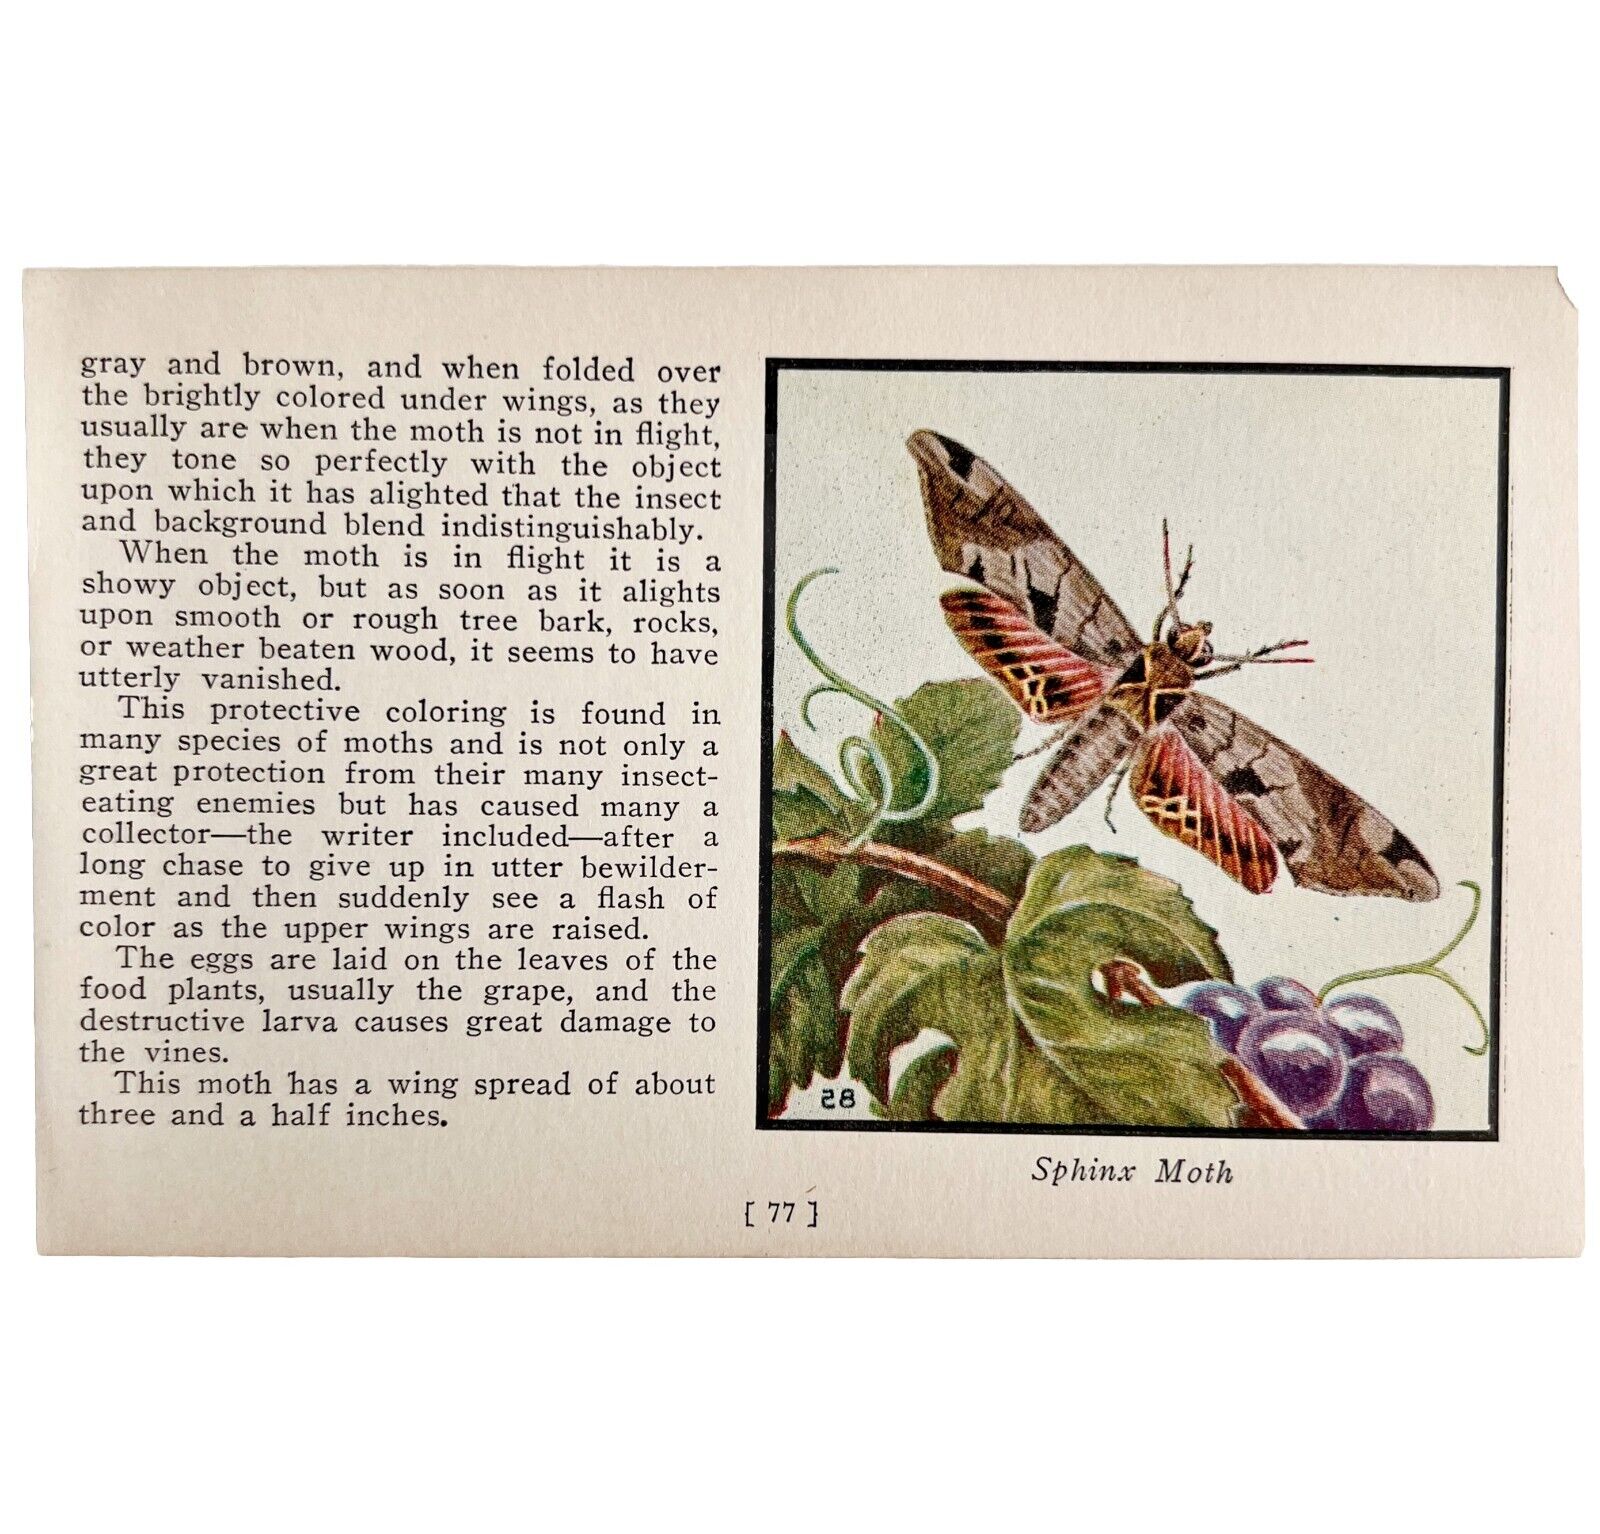 Sphinx Moth 1934 Butterflies America Of Antique Insect Art PCBG14A